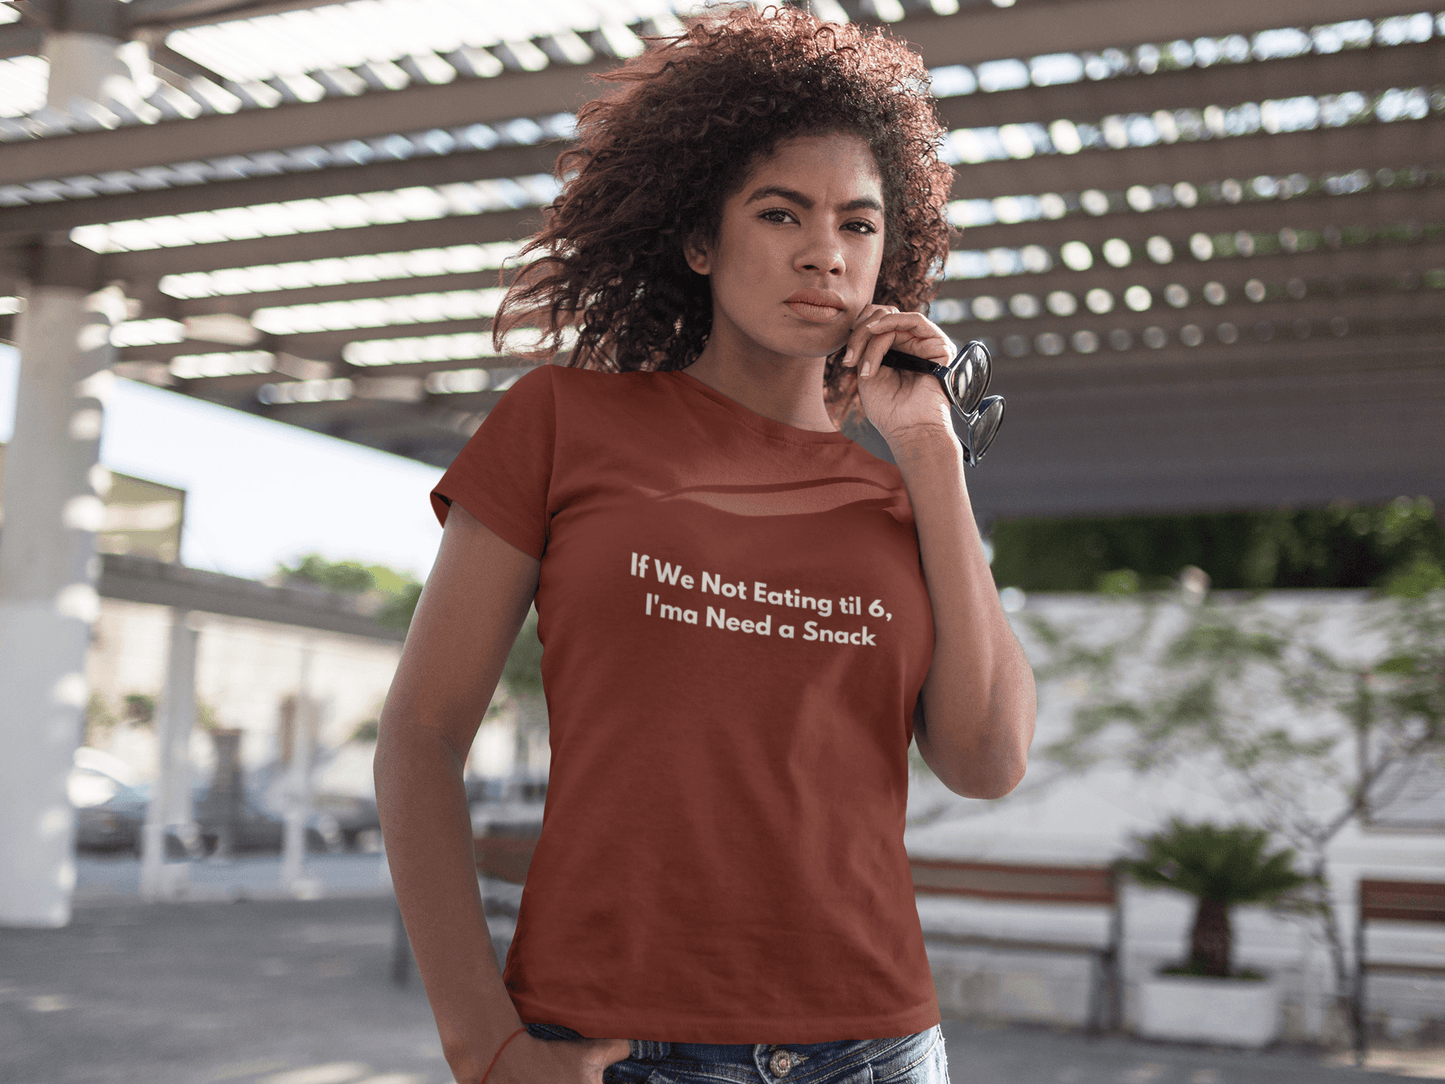 If We Not Eating Til 6 Tee - Sharp Tact Kreativ | Tees & Gifts with Encouraging Messages to Brighten Your Day with a Bit of Wit